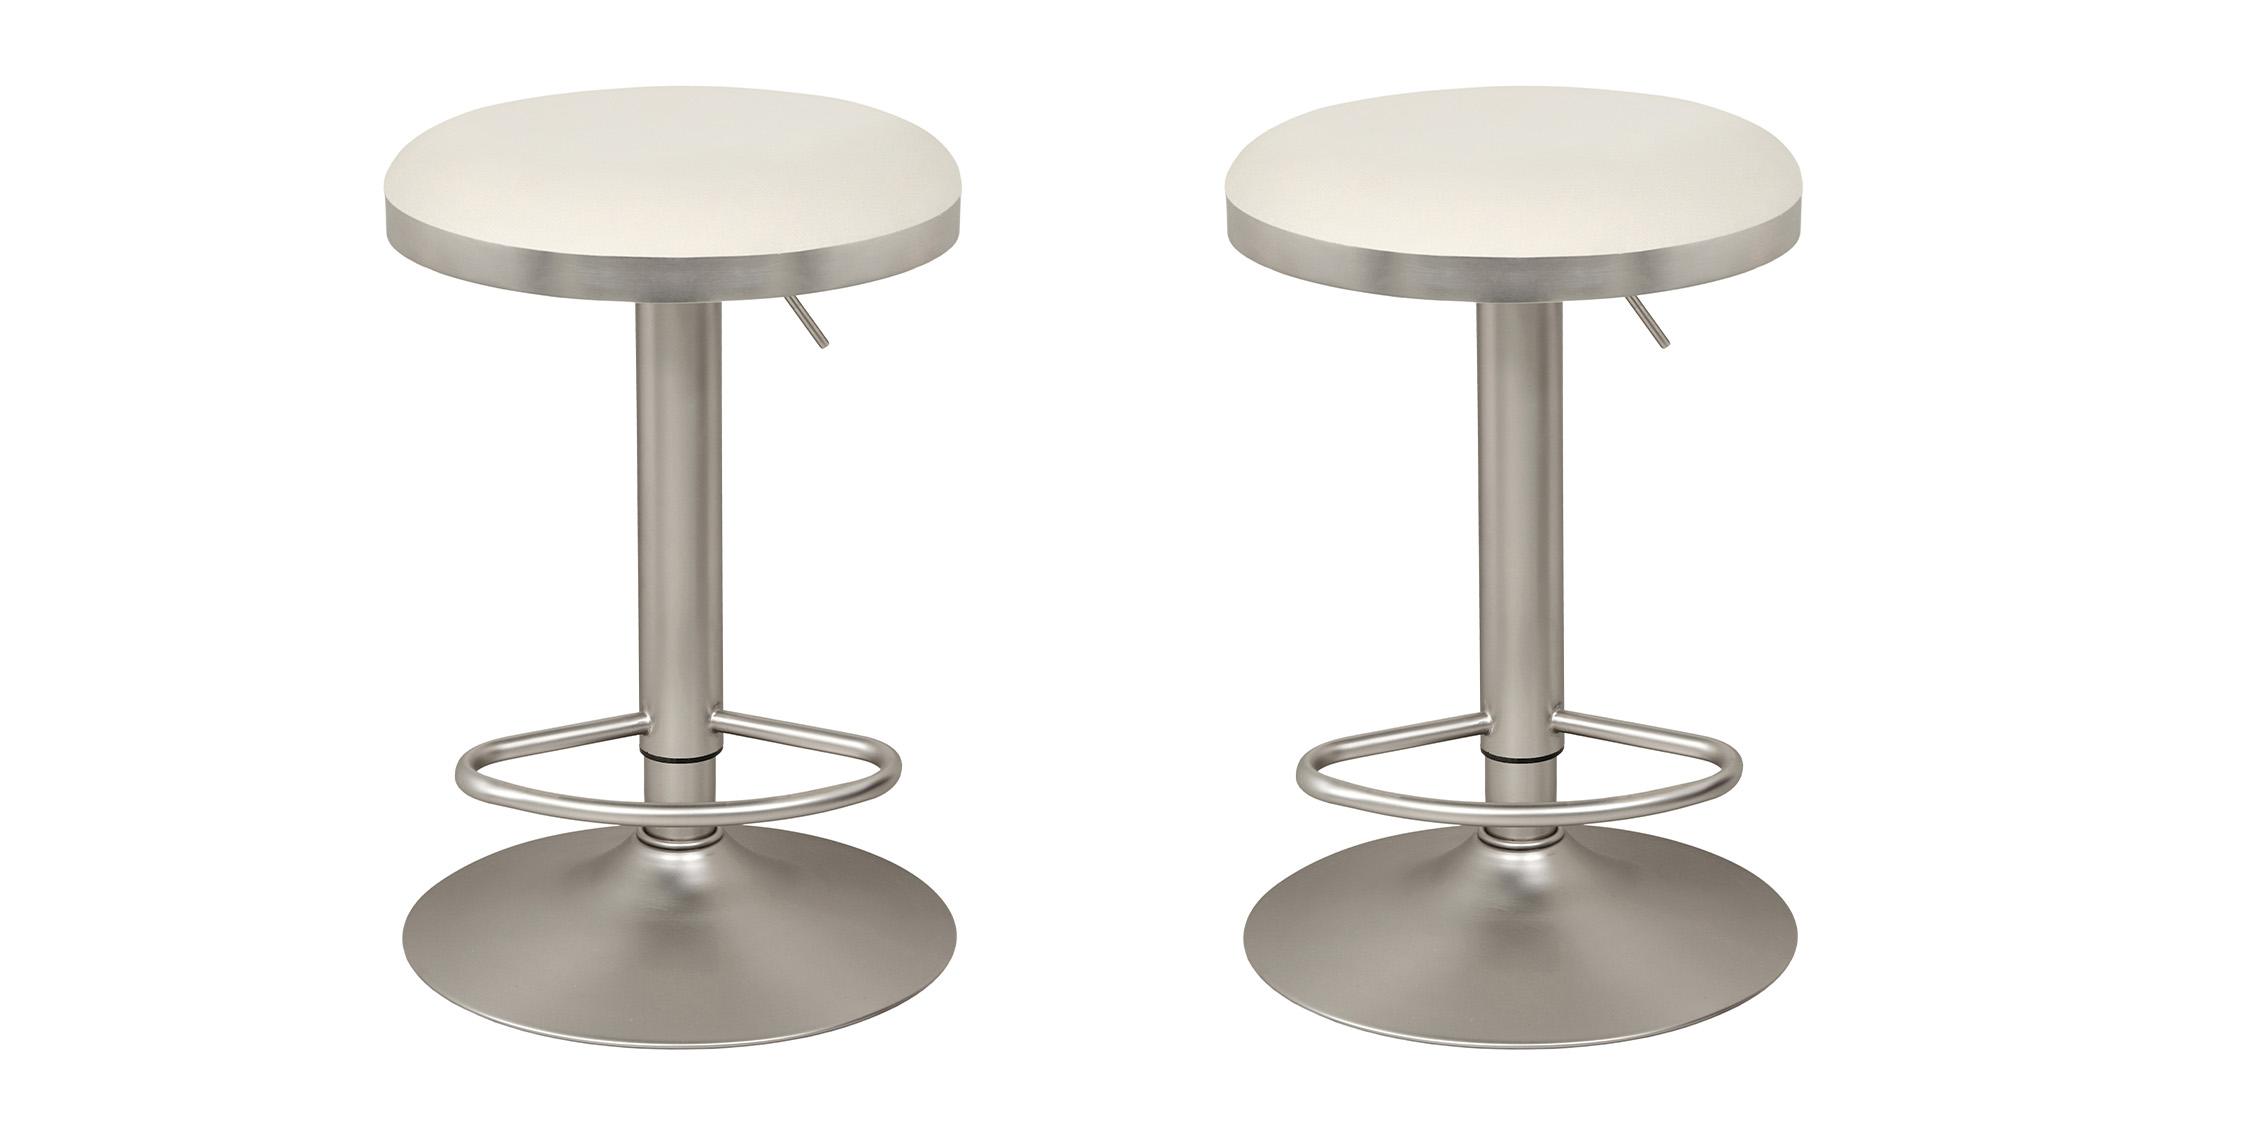 Contemporary, Modern Adjustable Stool Set BRODY 956White-C 956White-C-Set-2 in Chrome, White Faux Leather